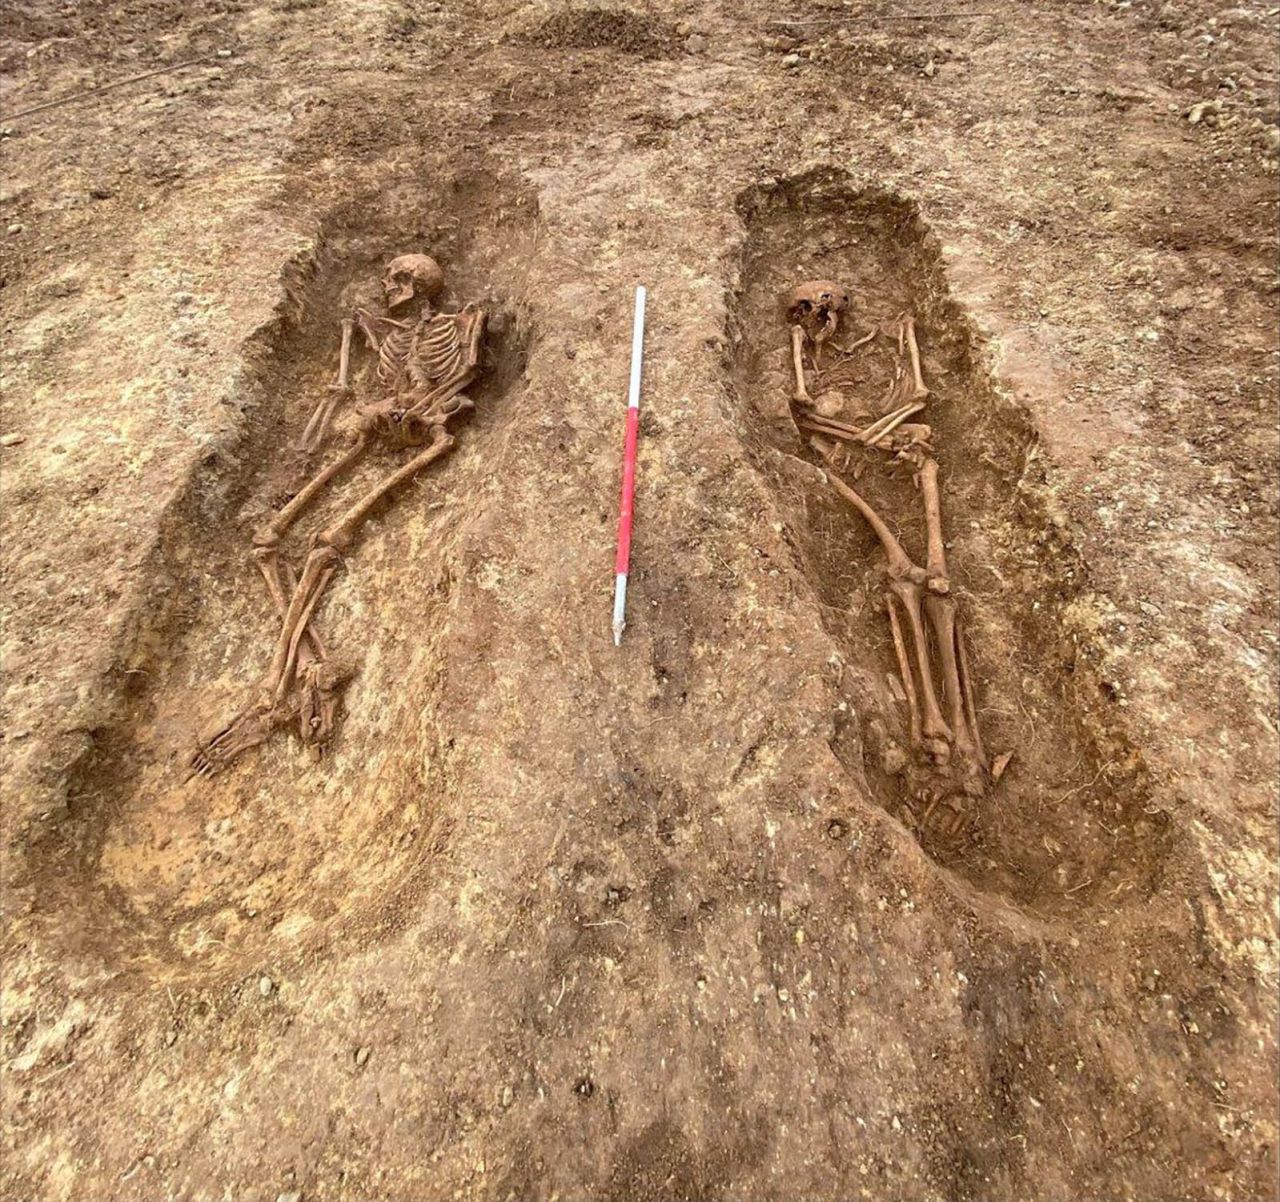 The previously undiscovered remains included men, women and children. 